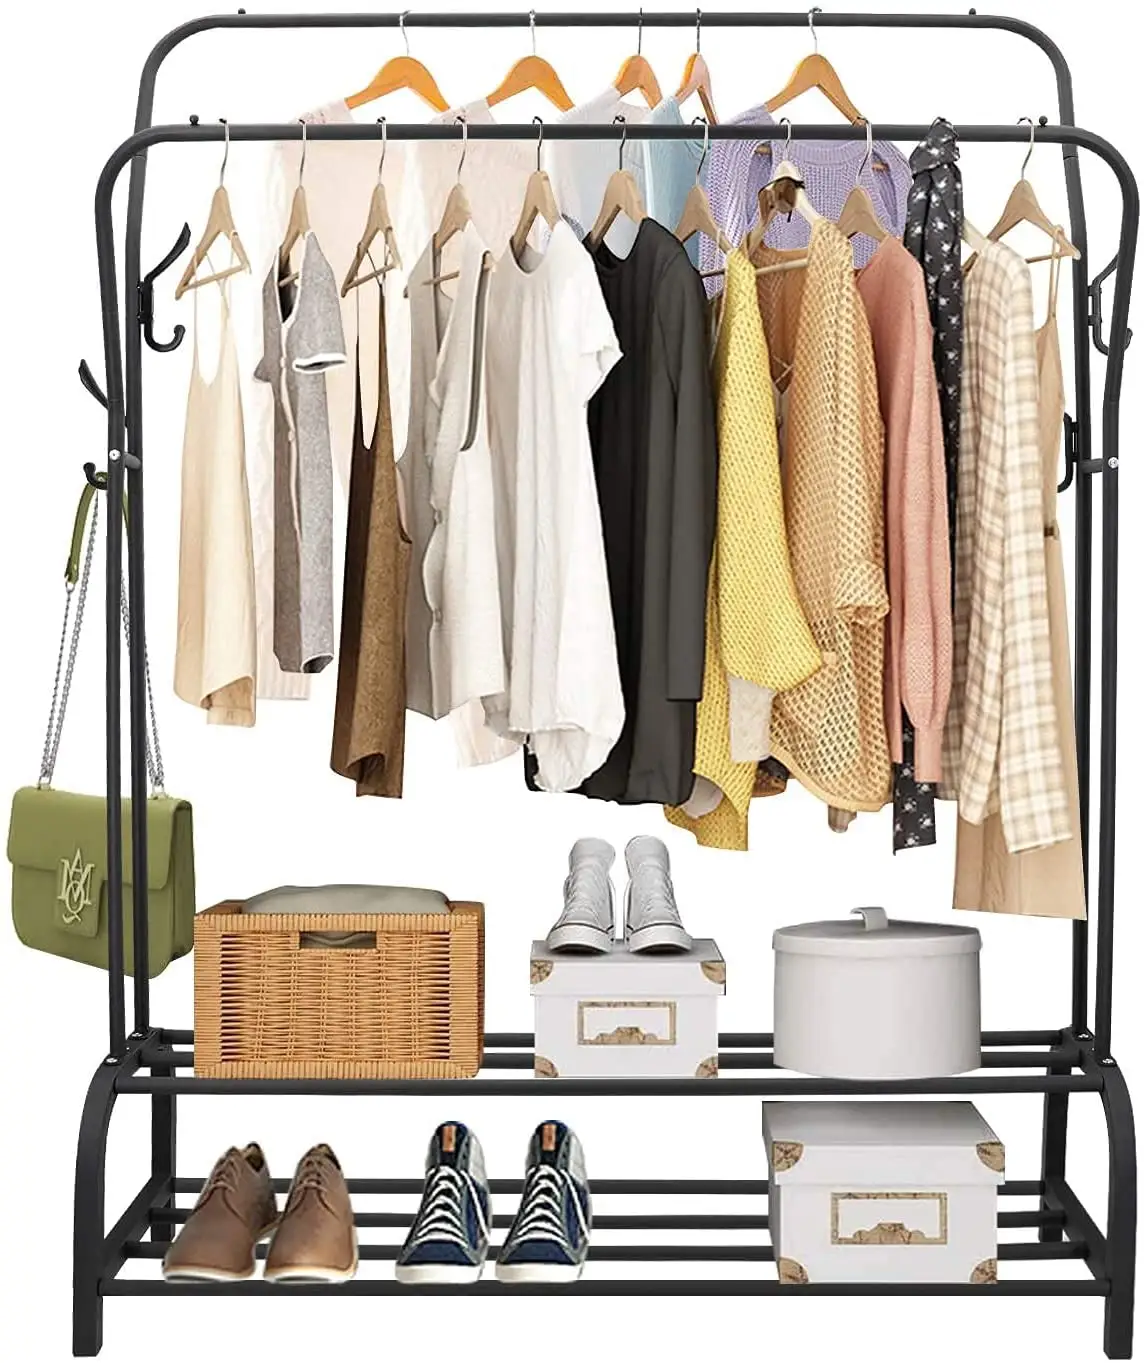 Heavy Duty Double-Rail Garment Rack 2 Tier Shoe Shelves Large Clothes Hanging Rack Clothing Organizer Indoor Bedroom Store